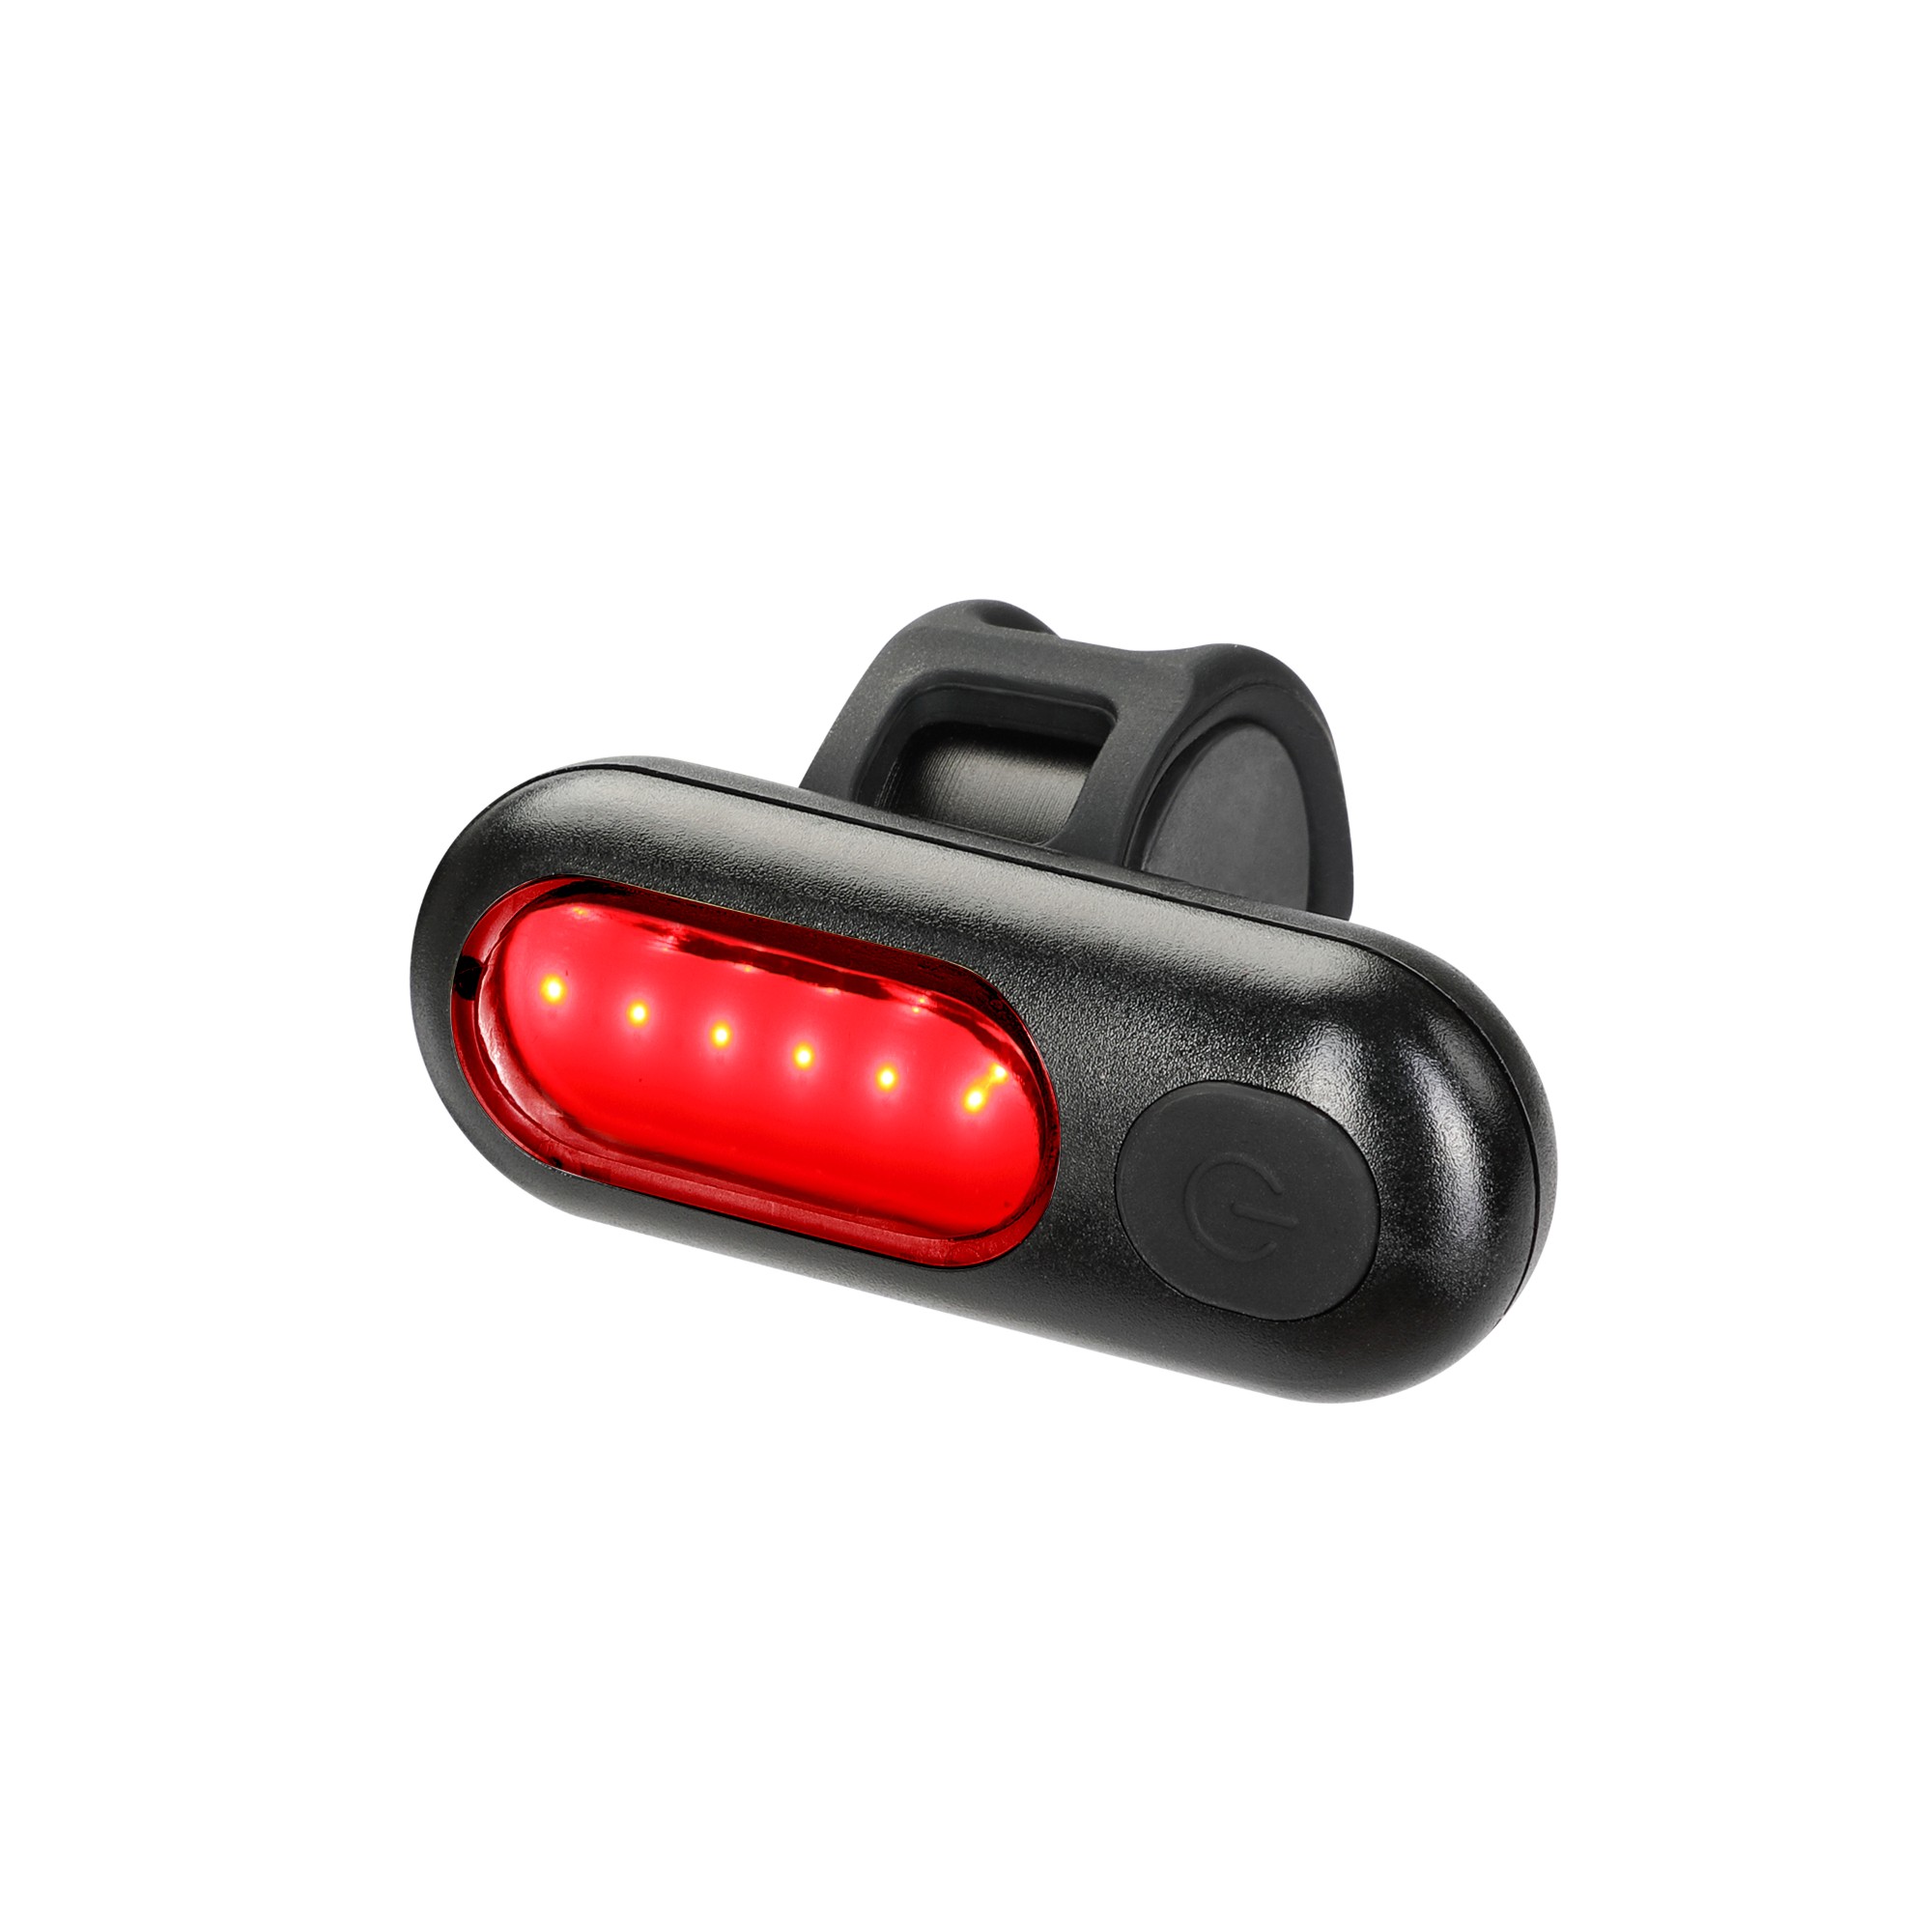 USB Rechargeable bike tail light BC-TL5545